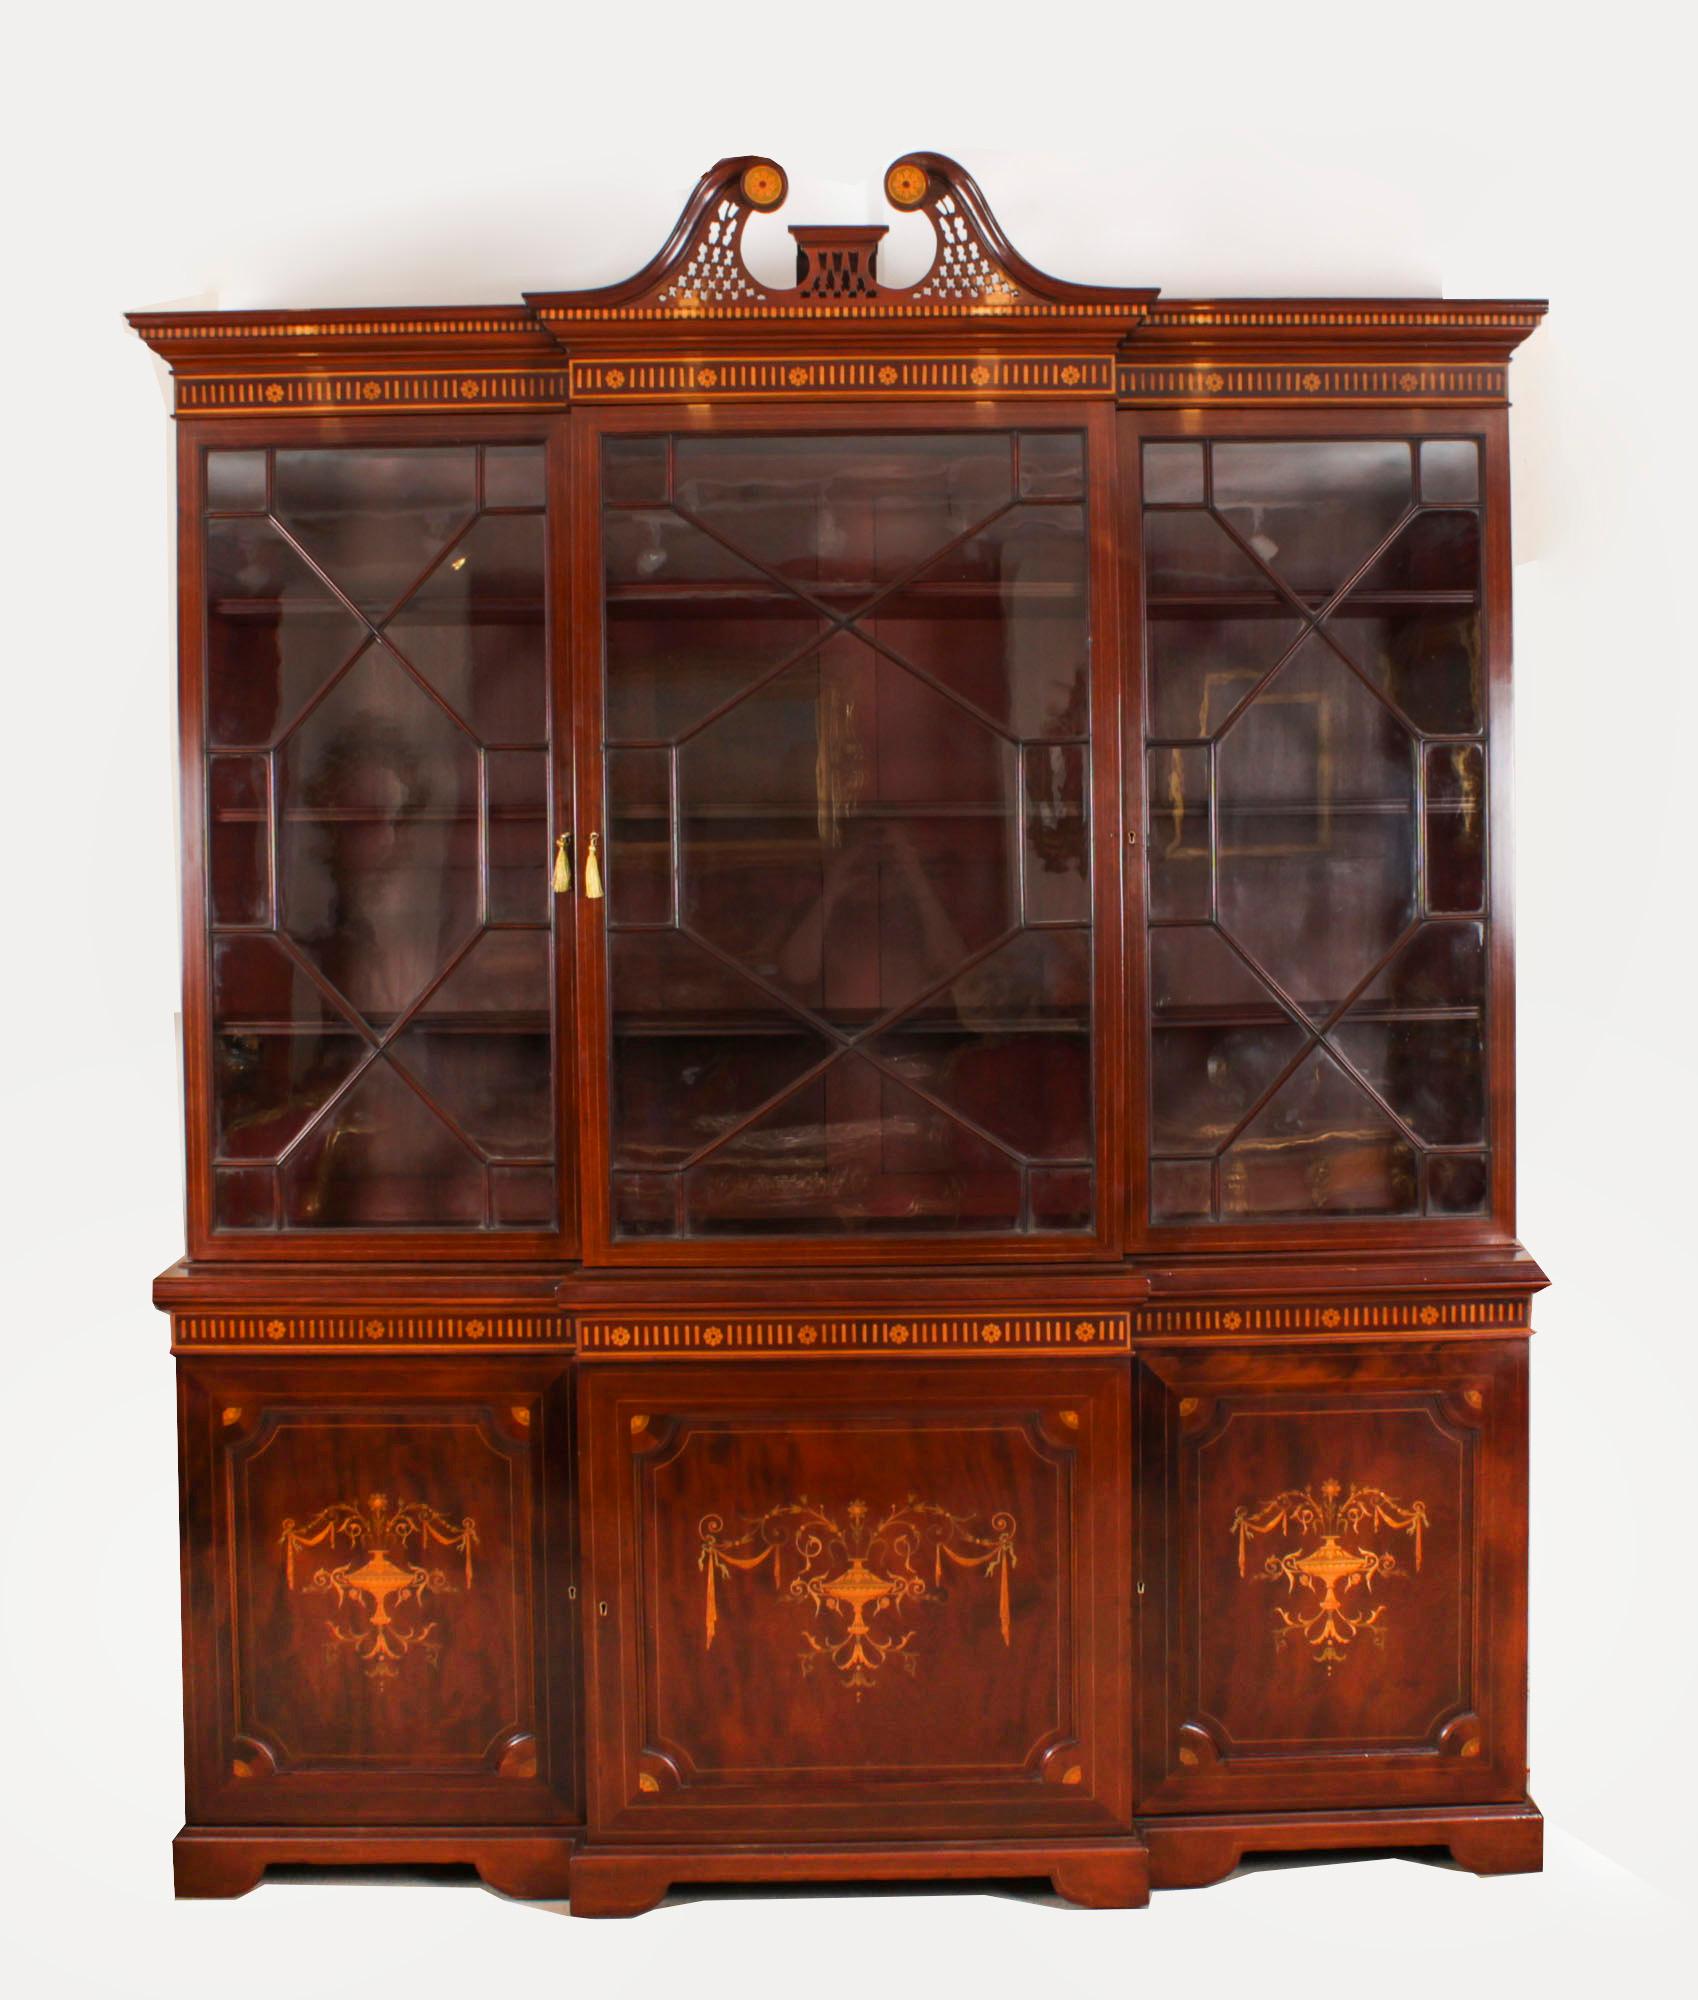 This is a beautiful antique late Victorian Sheraton Revival top quality flame mahogany and marquetry inlaid three door breakfront bookcase, masterfully crafted in rich solid mahogany, circa 1890 in date.

It is a truly grand piece decorated with